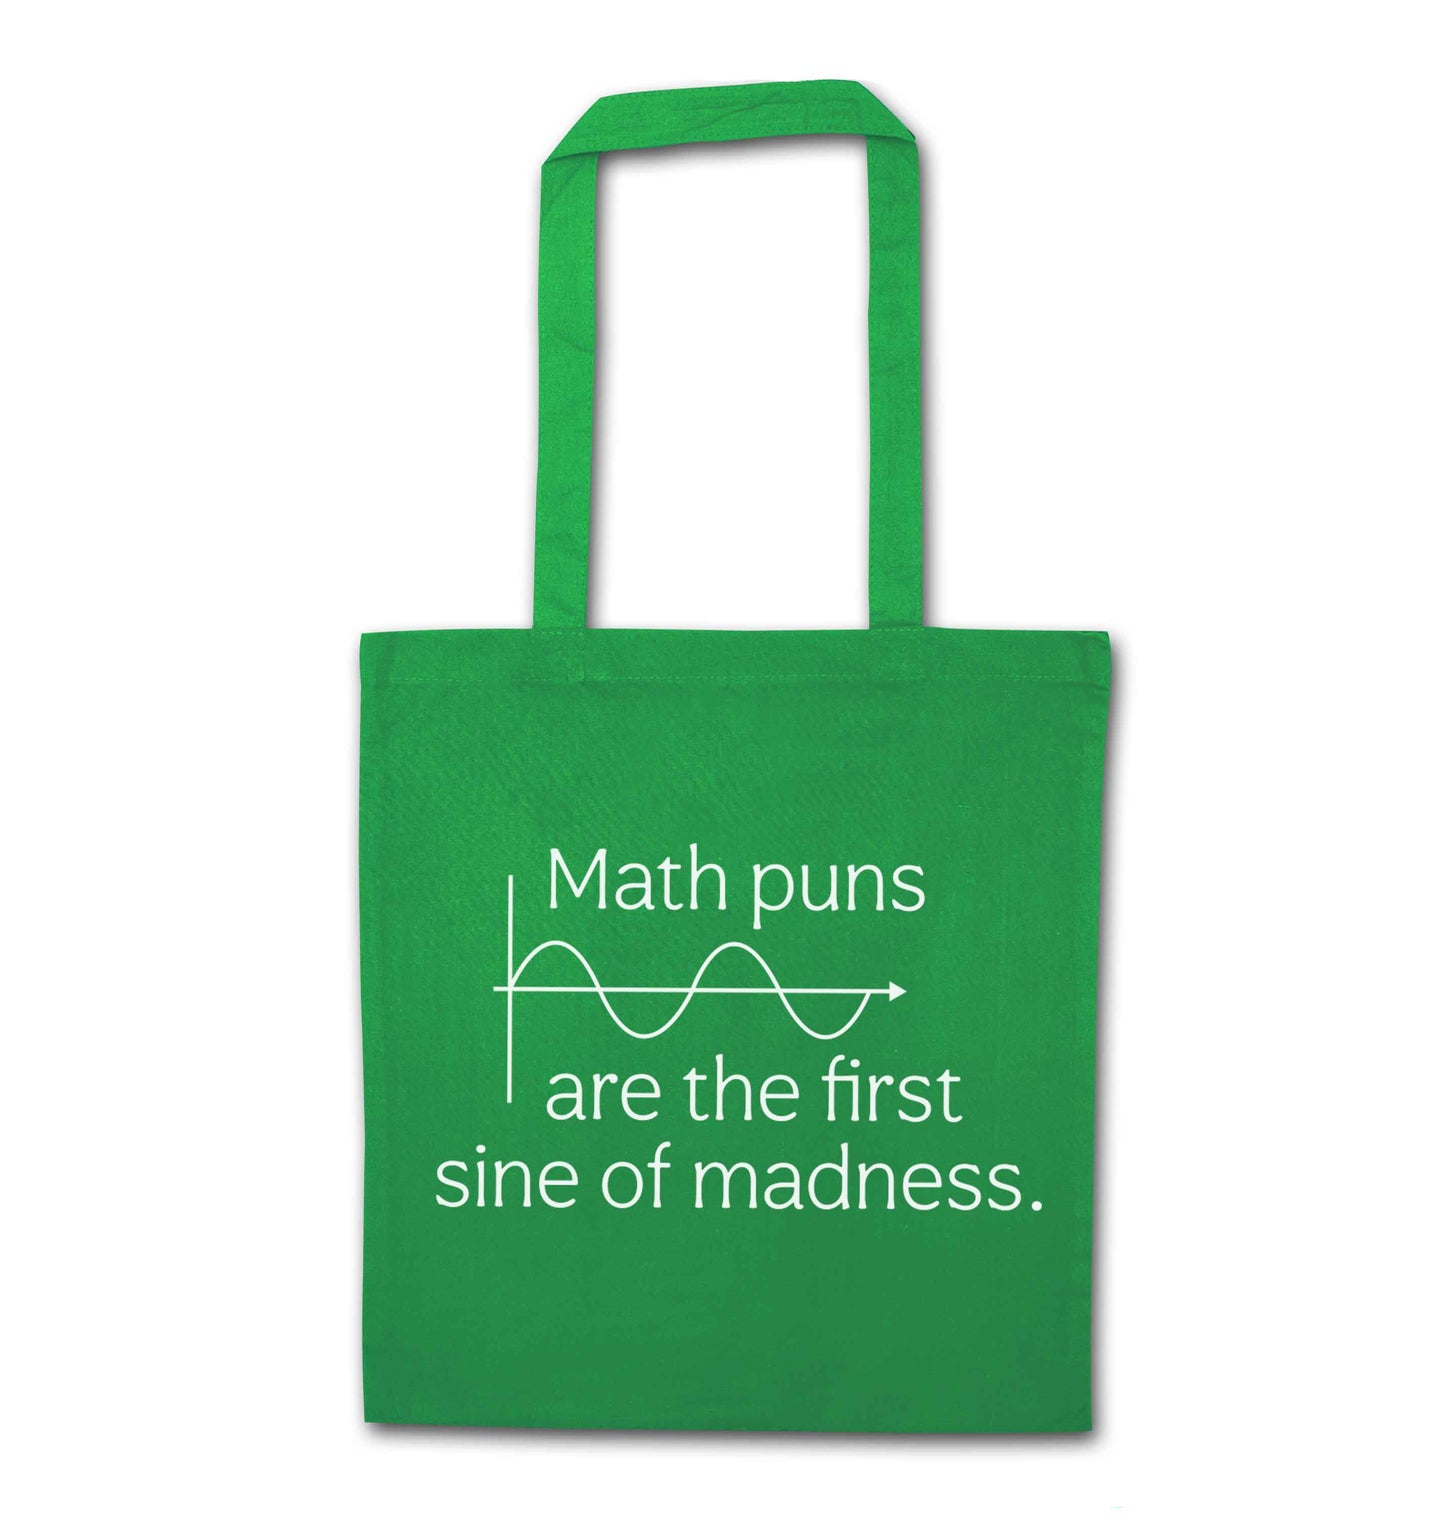 Math puns are the first sine of madness green tote bag